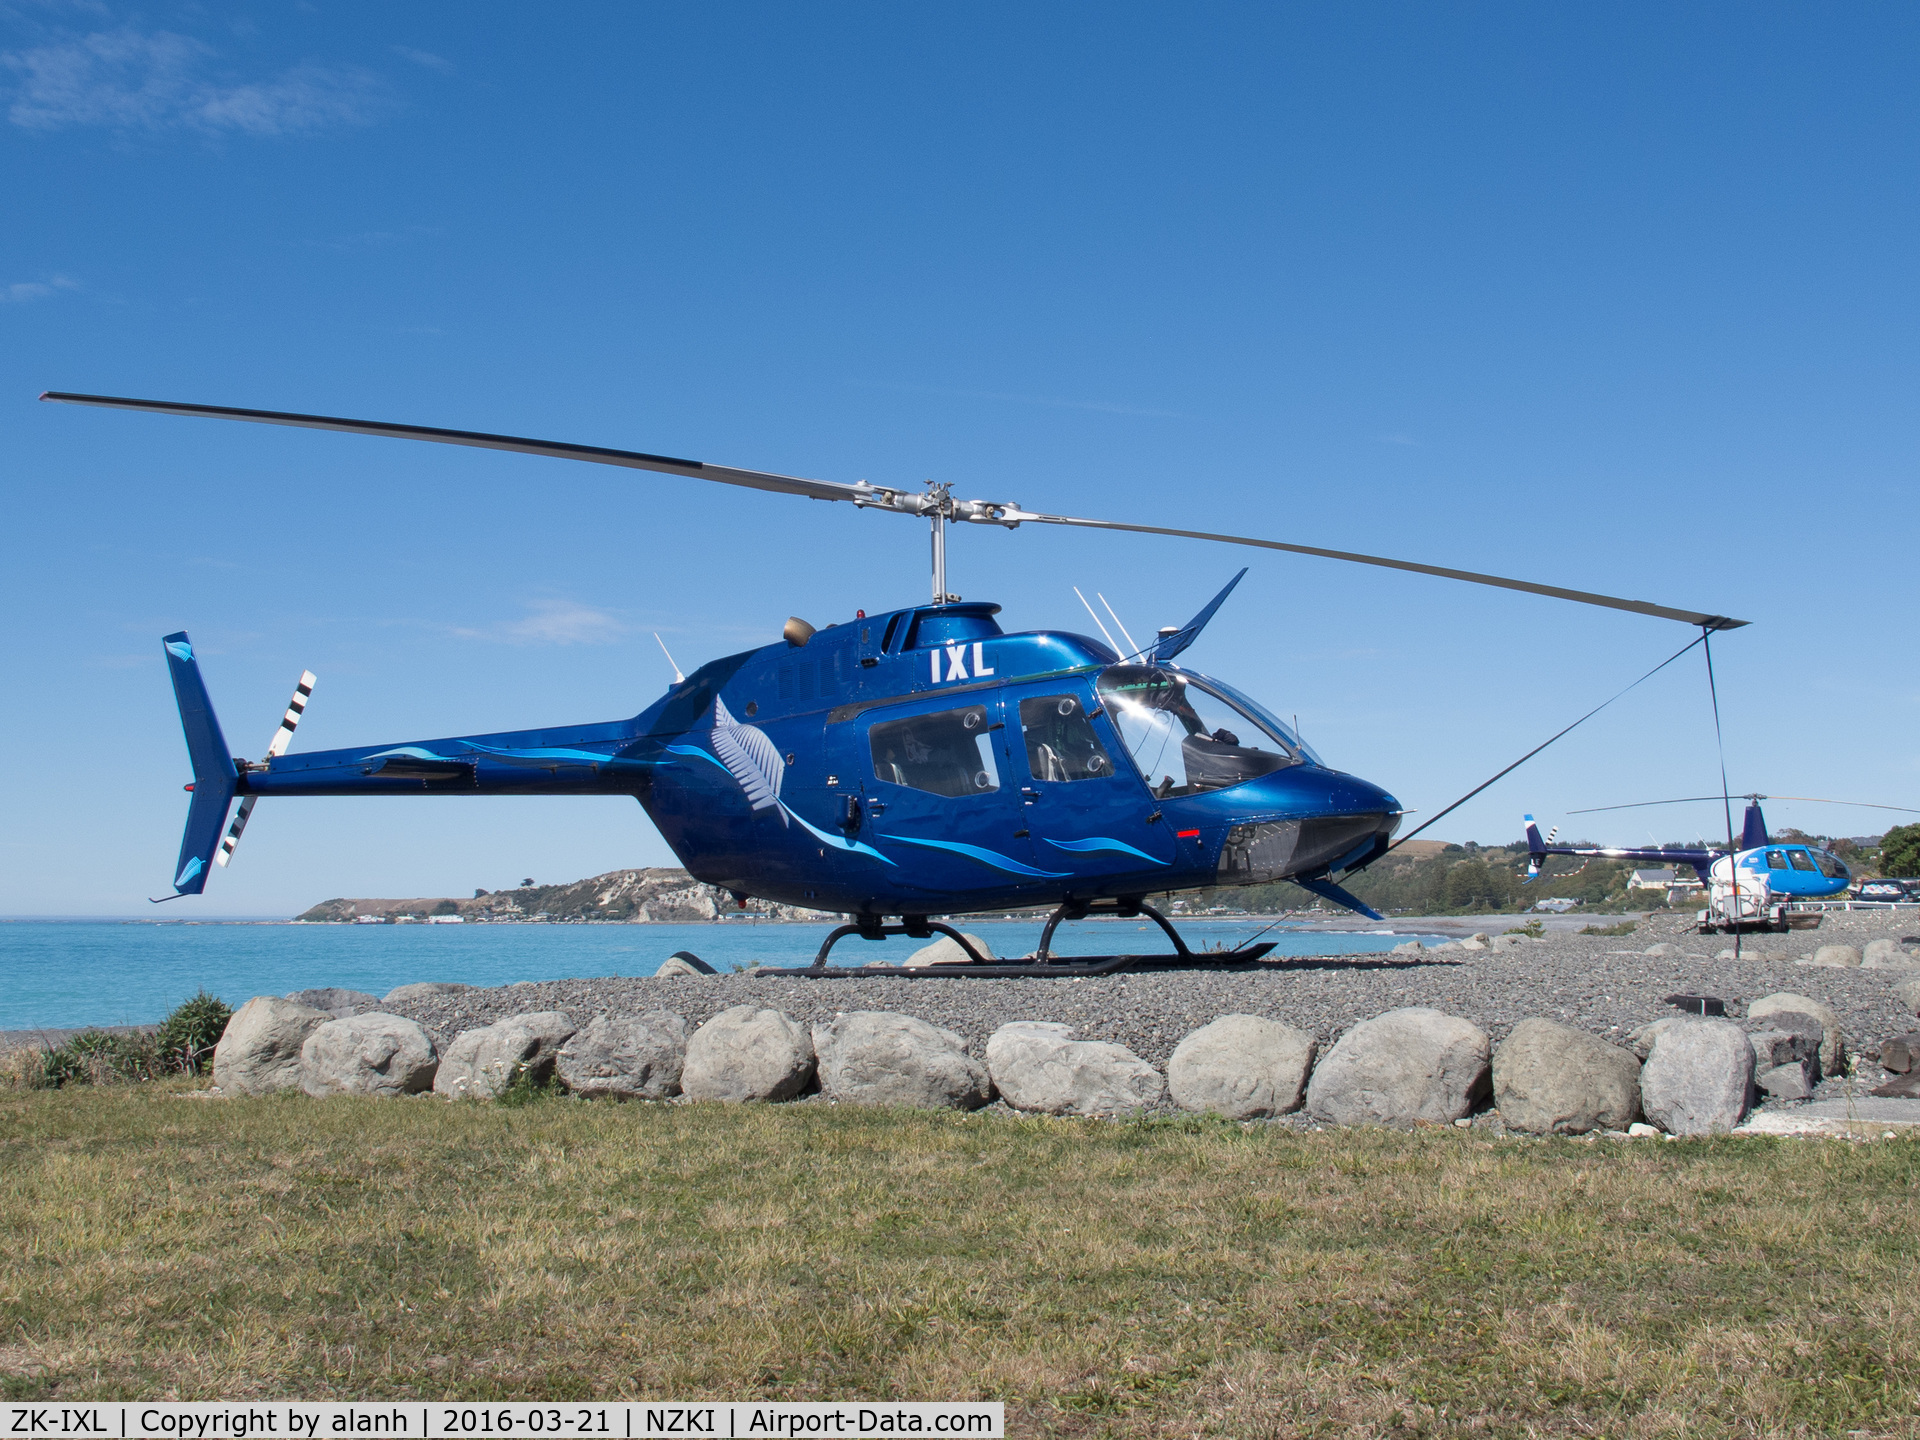 ZK-IXL, 1972 Bell OH-58A Kiowa (206A-1/CH-136) C/N 44062, Off airport, near Kaikoura Helicopters lot on the Kaikoura coast - their R44 ZK-HLE in the background